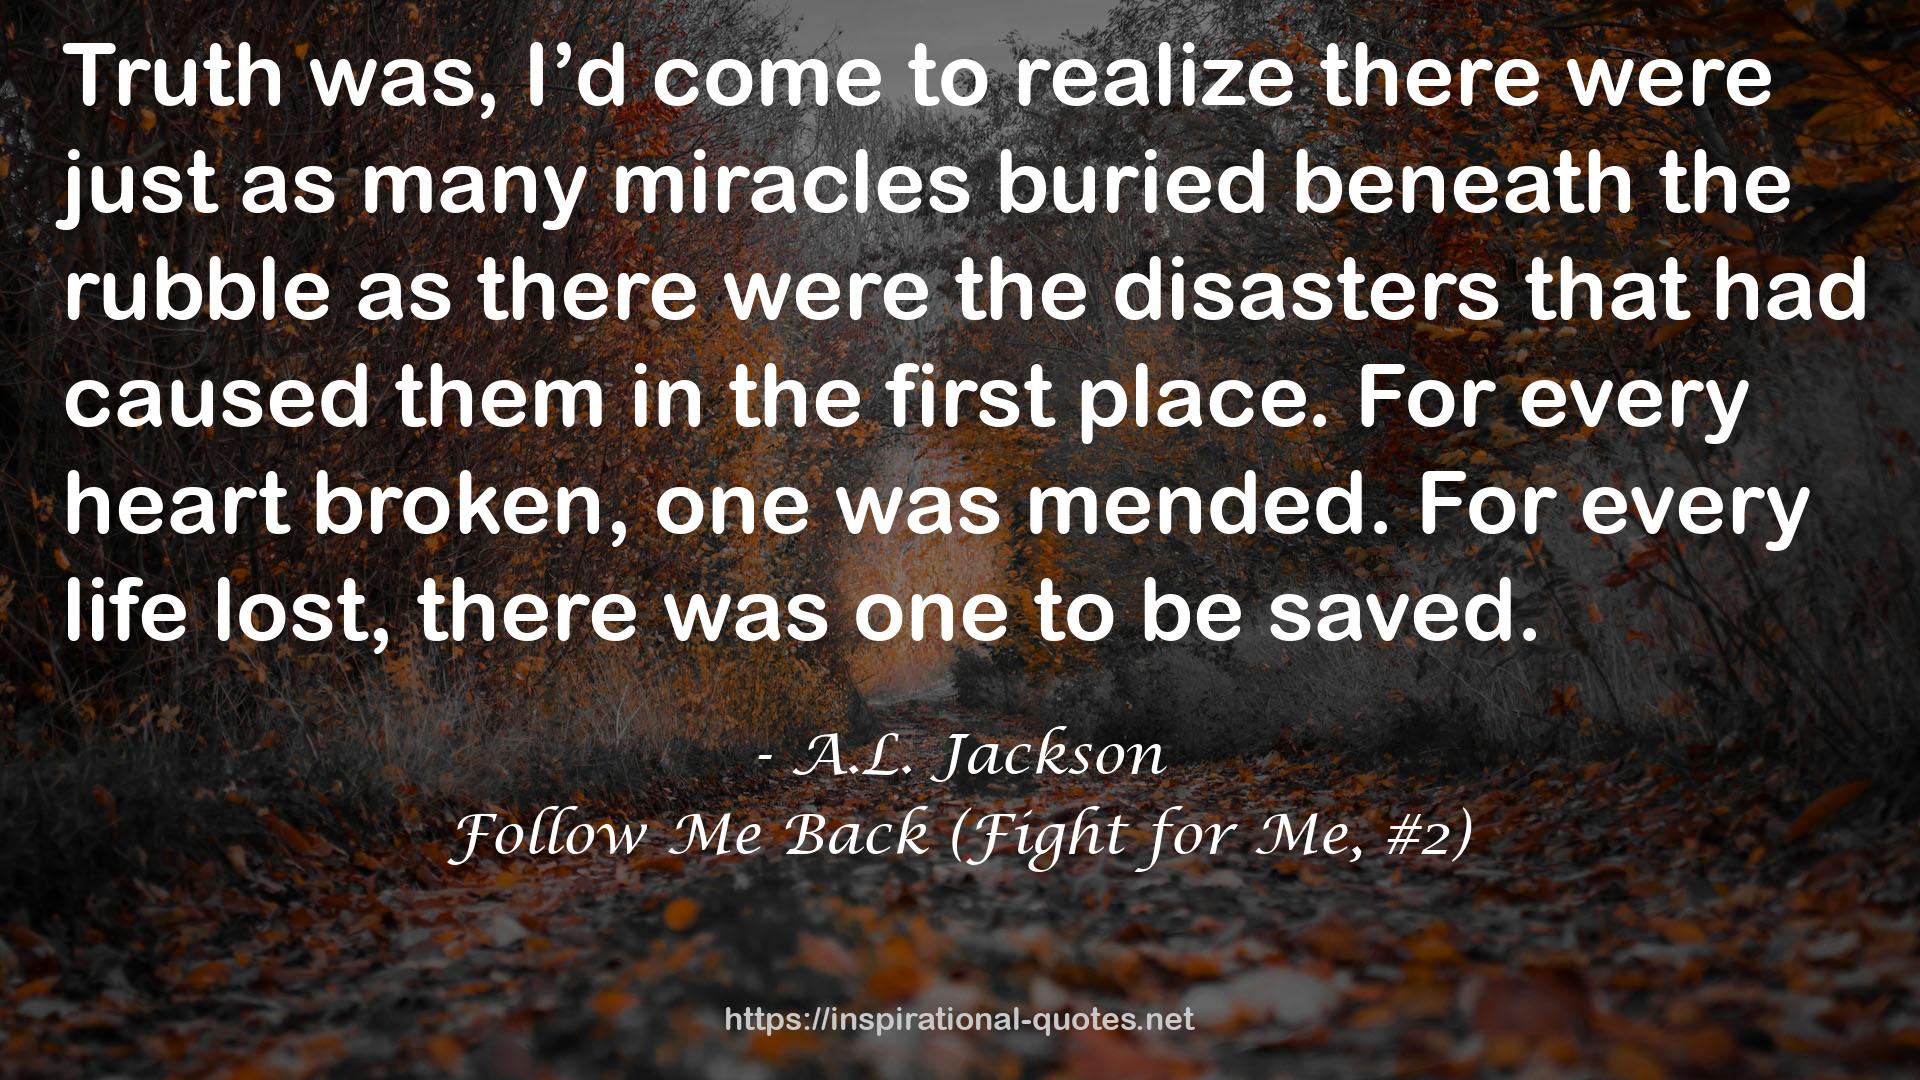 Follow Me Back (Fight for Me, #2) QUOTES